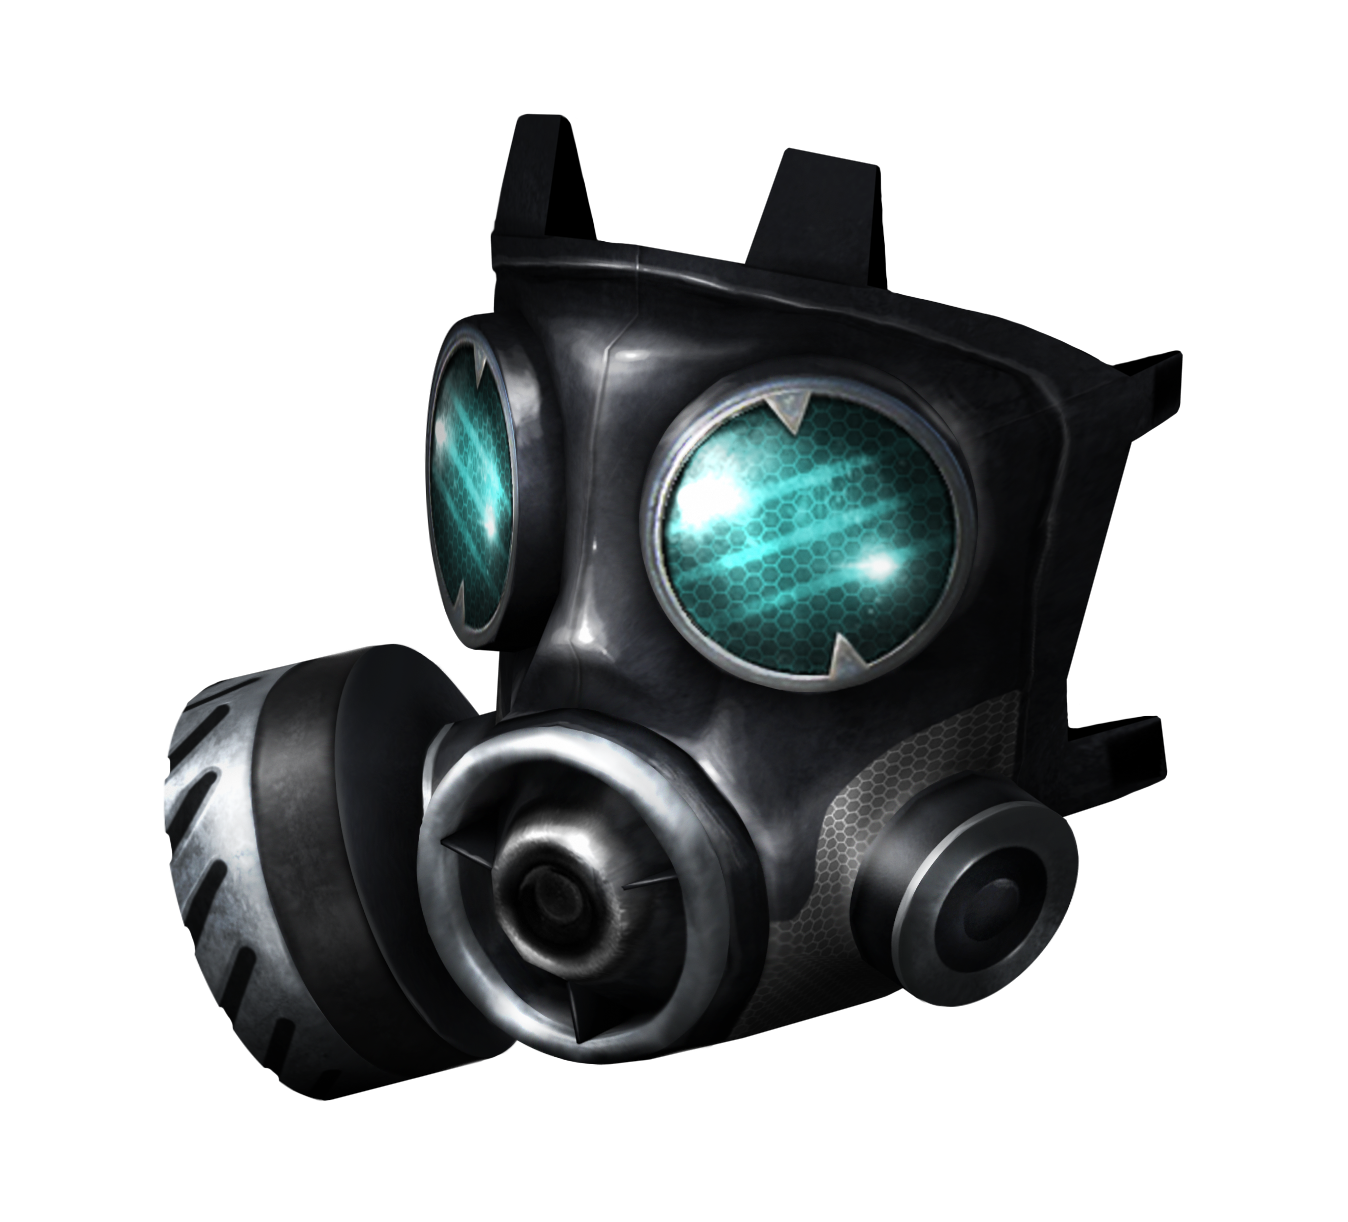 Gas Mask PNG Background Isolated Image